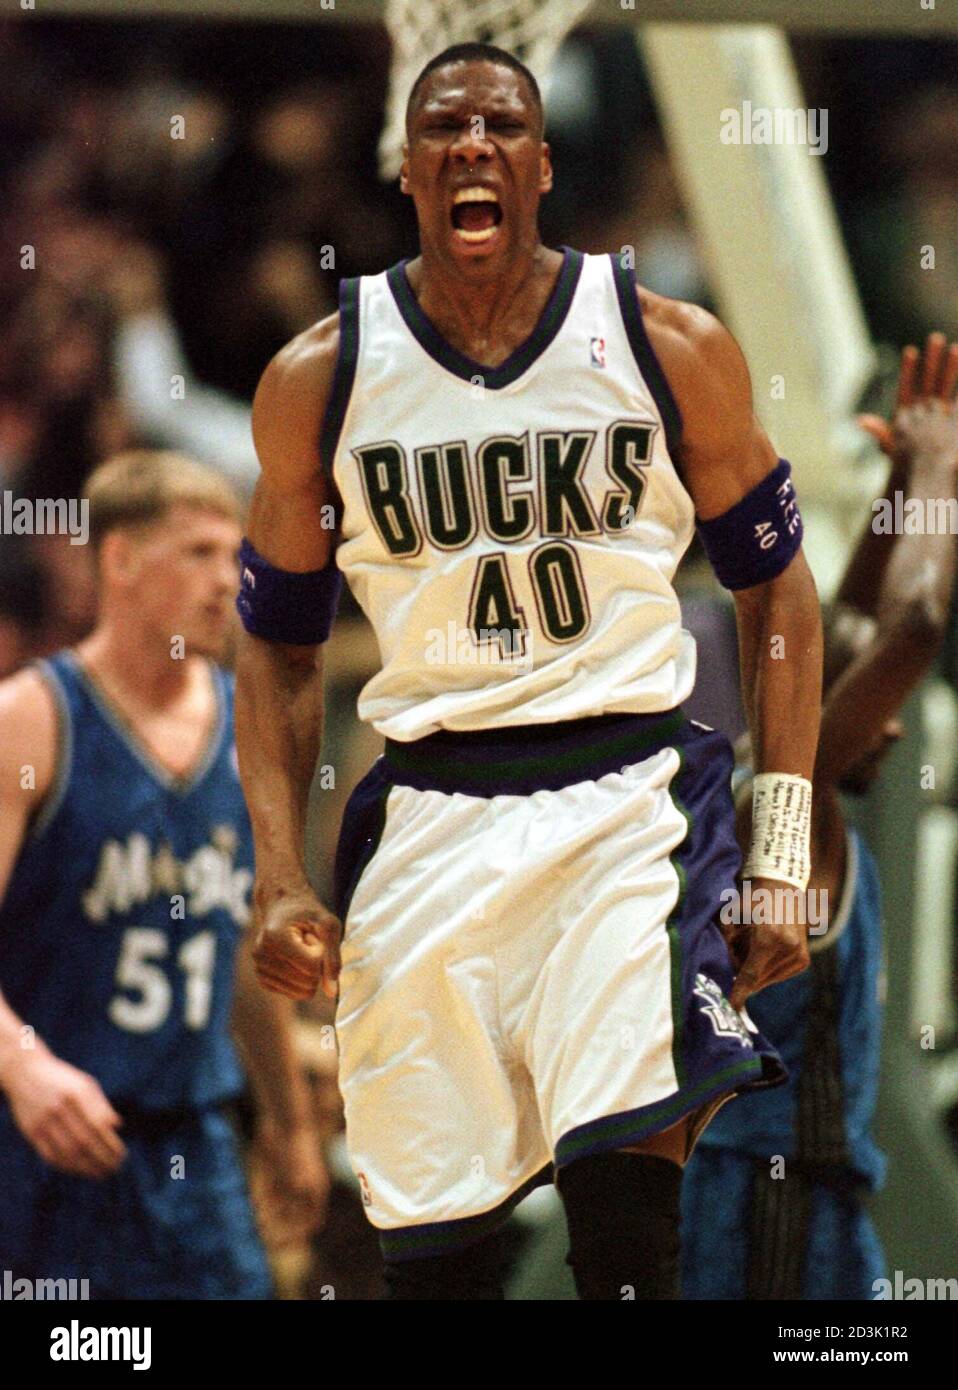 Milwaukee Bucks' center Ervin Johnson celebrates as he comes upcourt after  making a basket to put the Bucks up 98-90 over the Orlando Magic, late in  the fourth quarter, at the Bradley